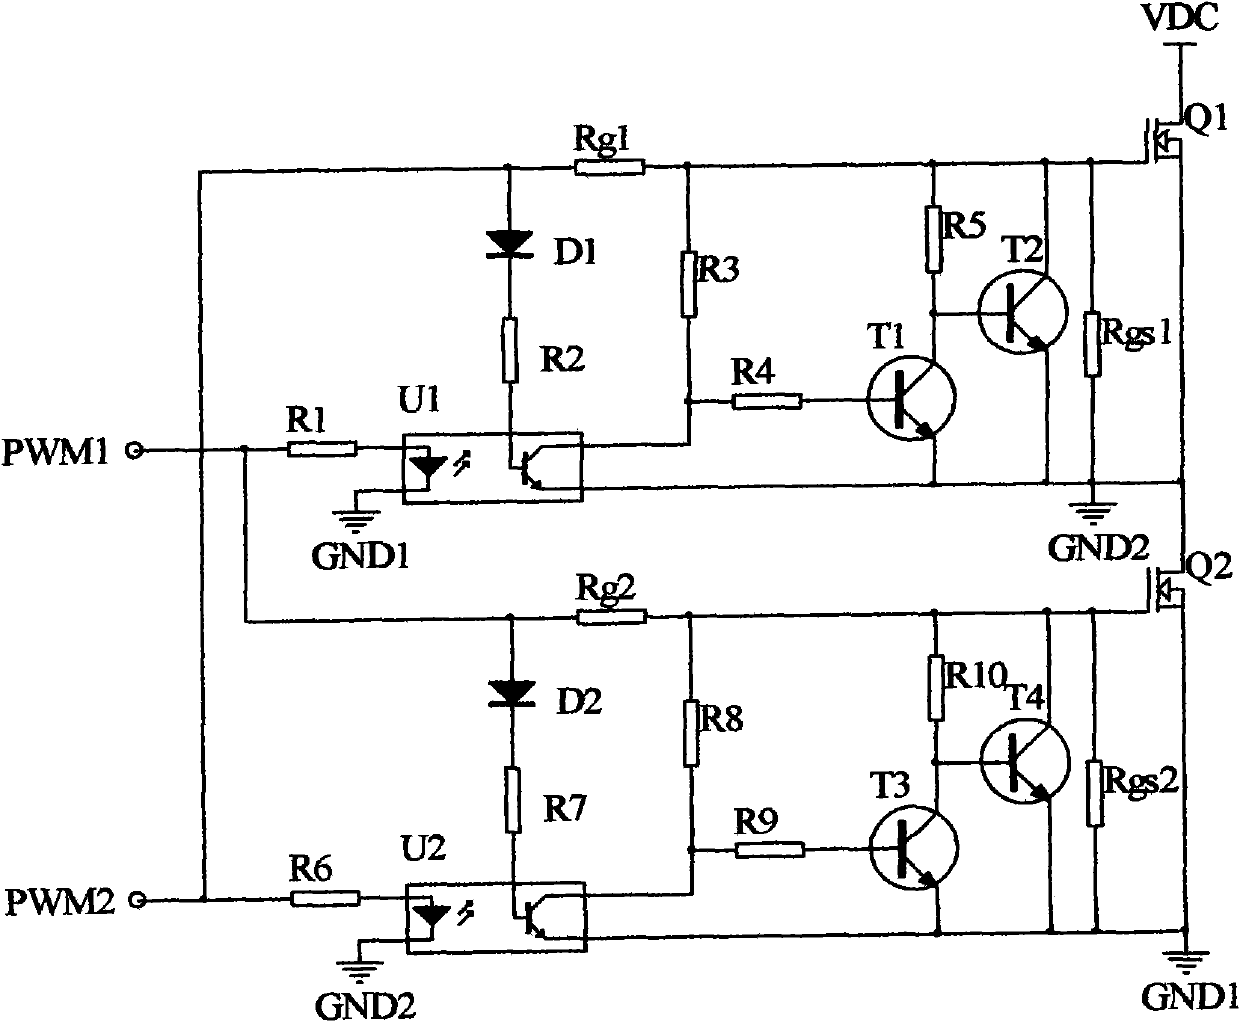 Method for controlling laser power supply energy based on DSP (Digital Signal Processor)